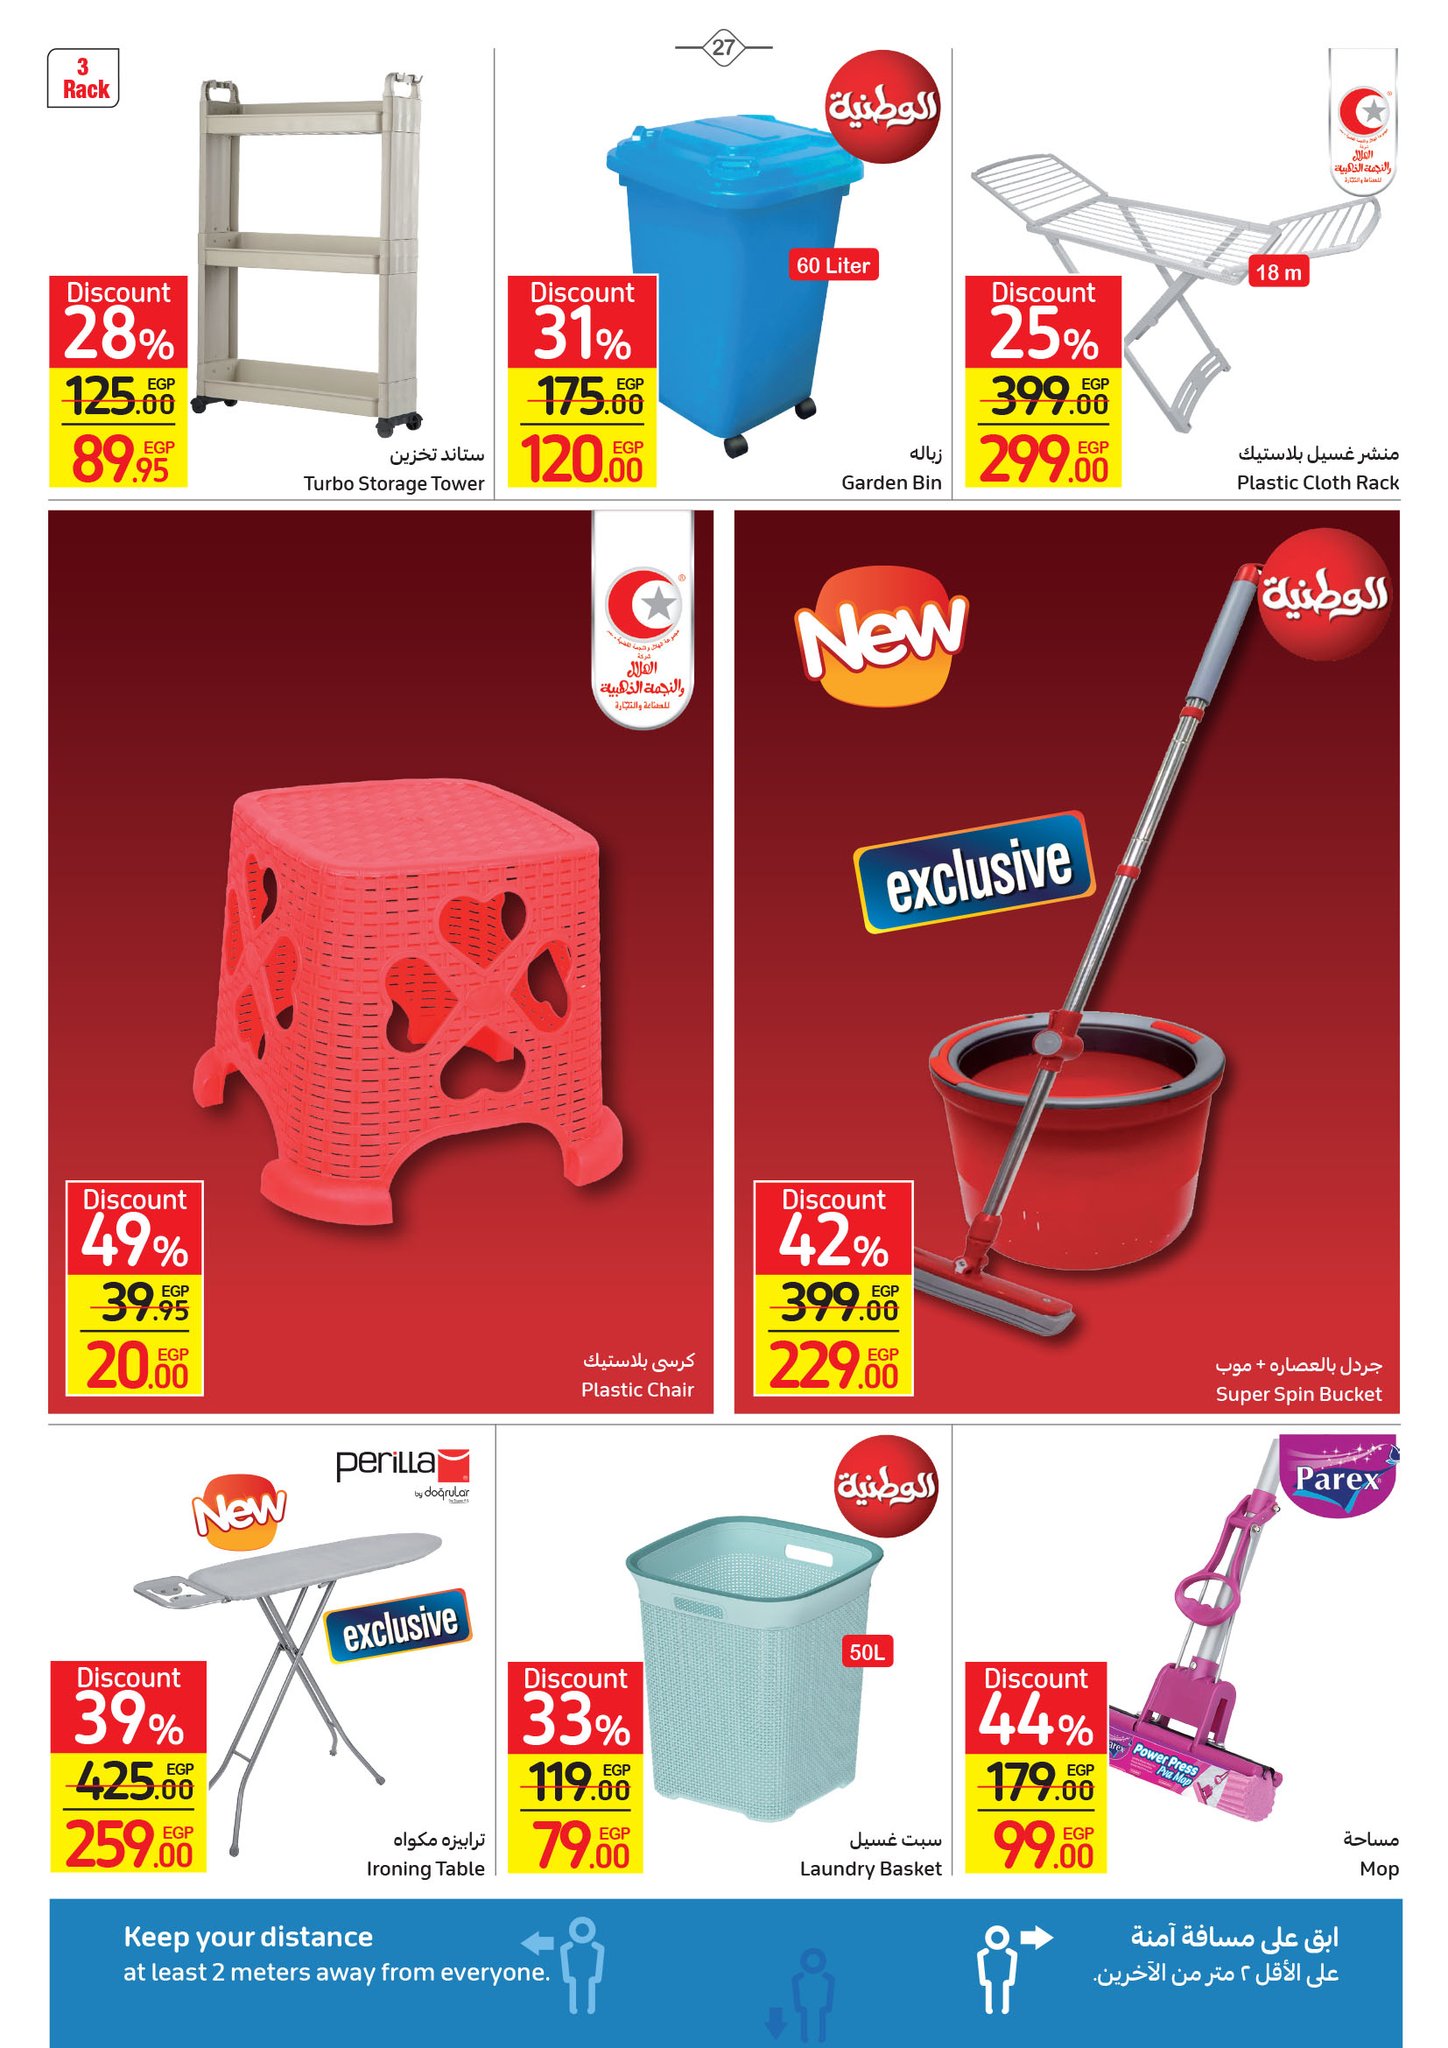 Watch the latest Carrefour half price offers "Last Chance Offer" until December 4 27